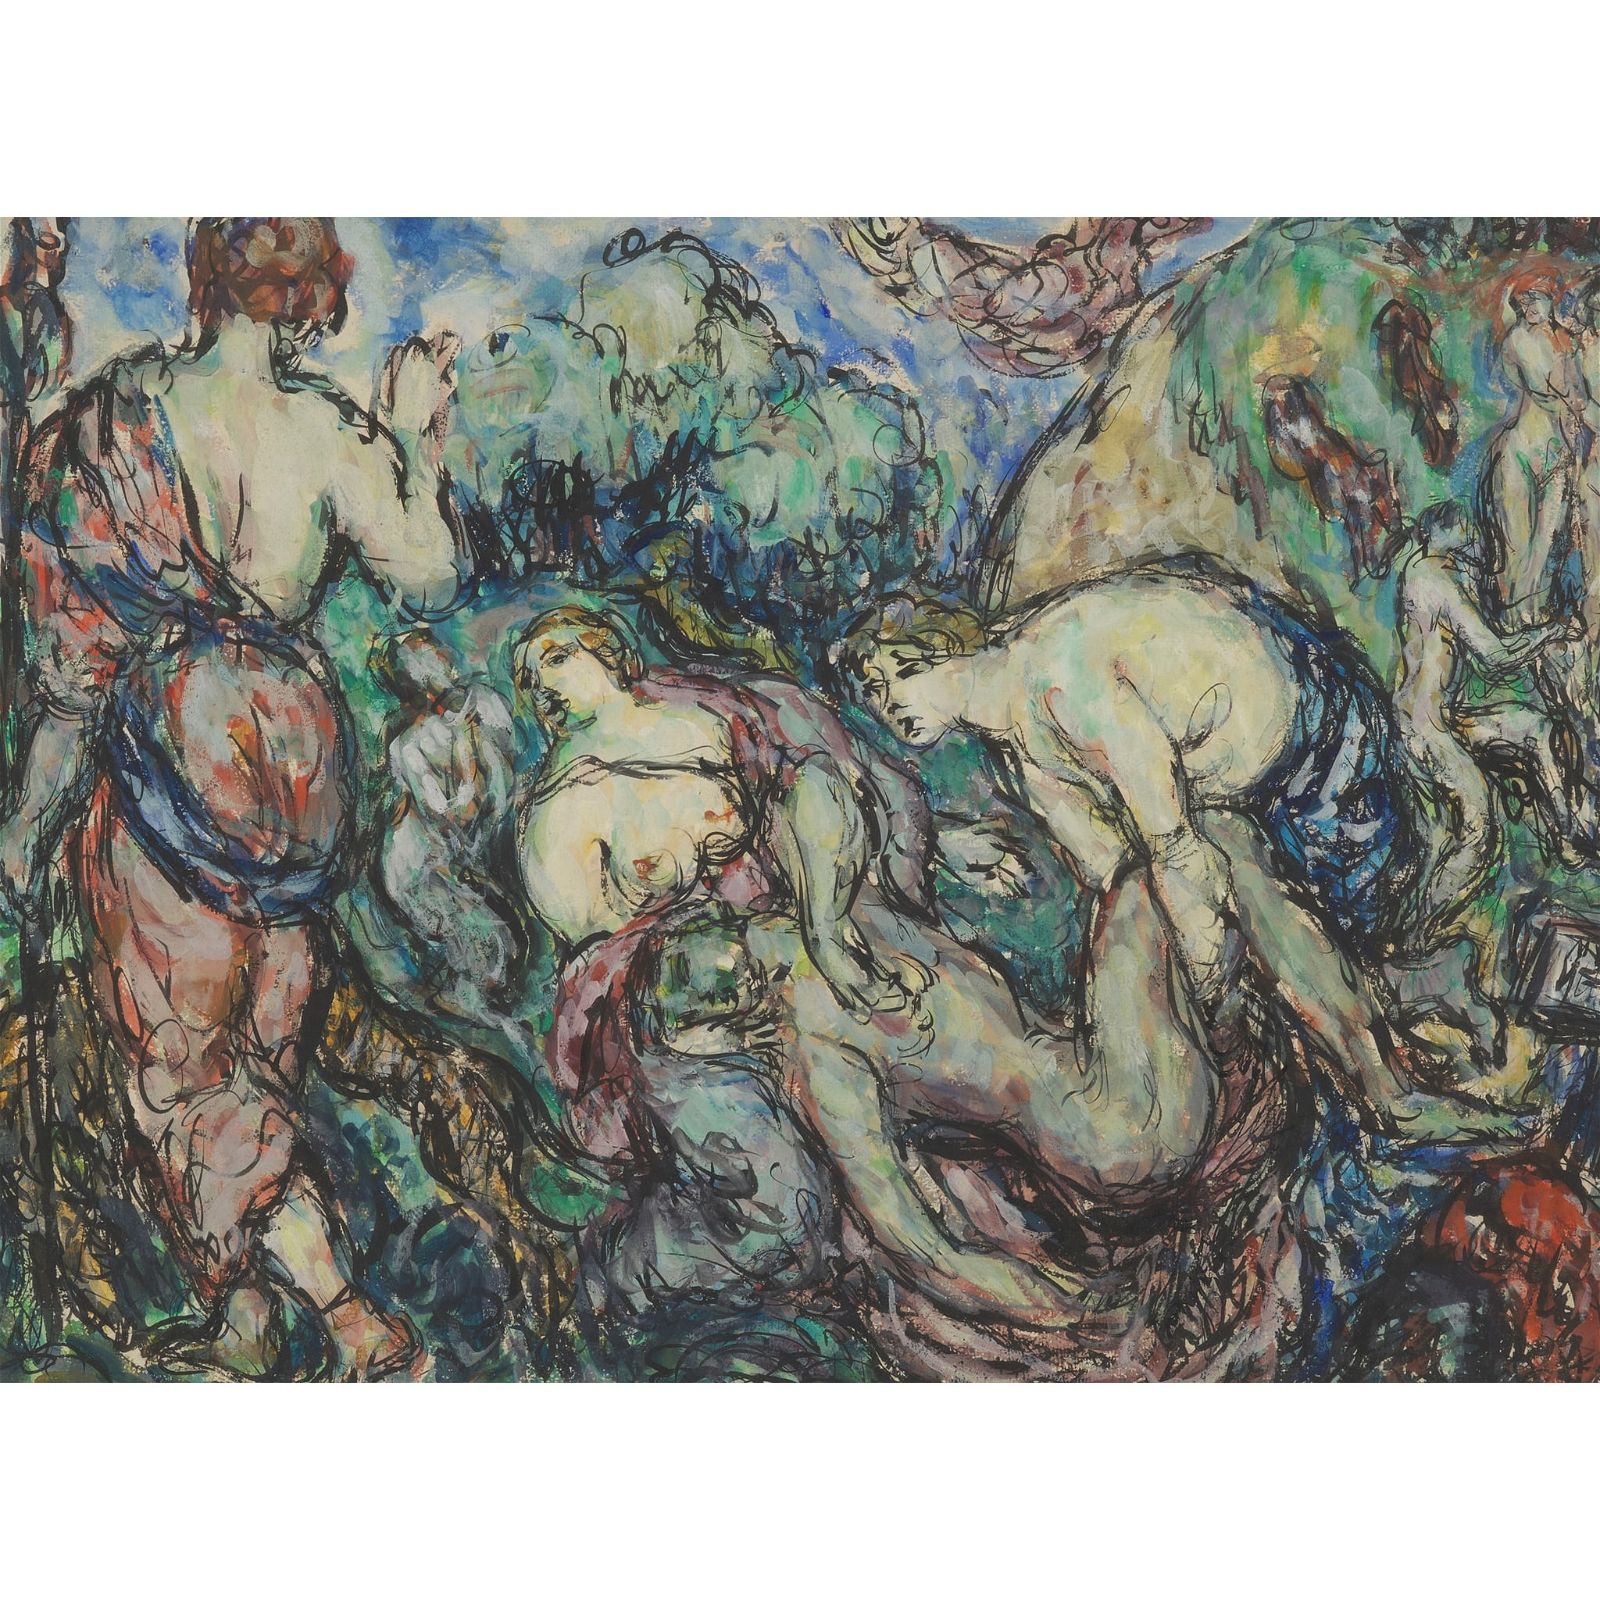 Dame Ethel Walker, ‘Nymphs Finding Narcissus,’ which hammered for £7,000 and sold for £9,170 ($11,550) with buyer’s premium at Lyon & Turnbull.